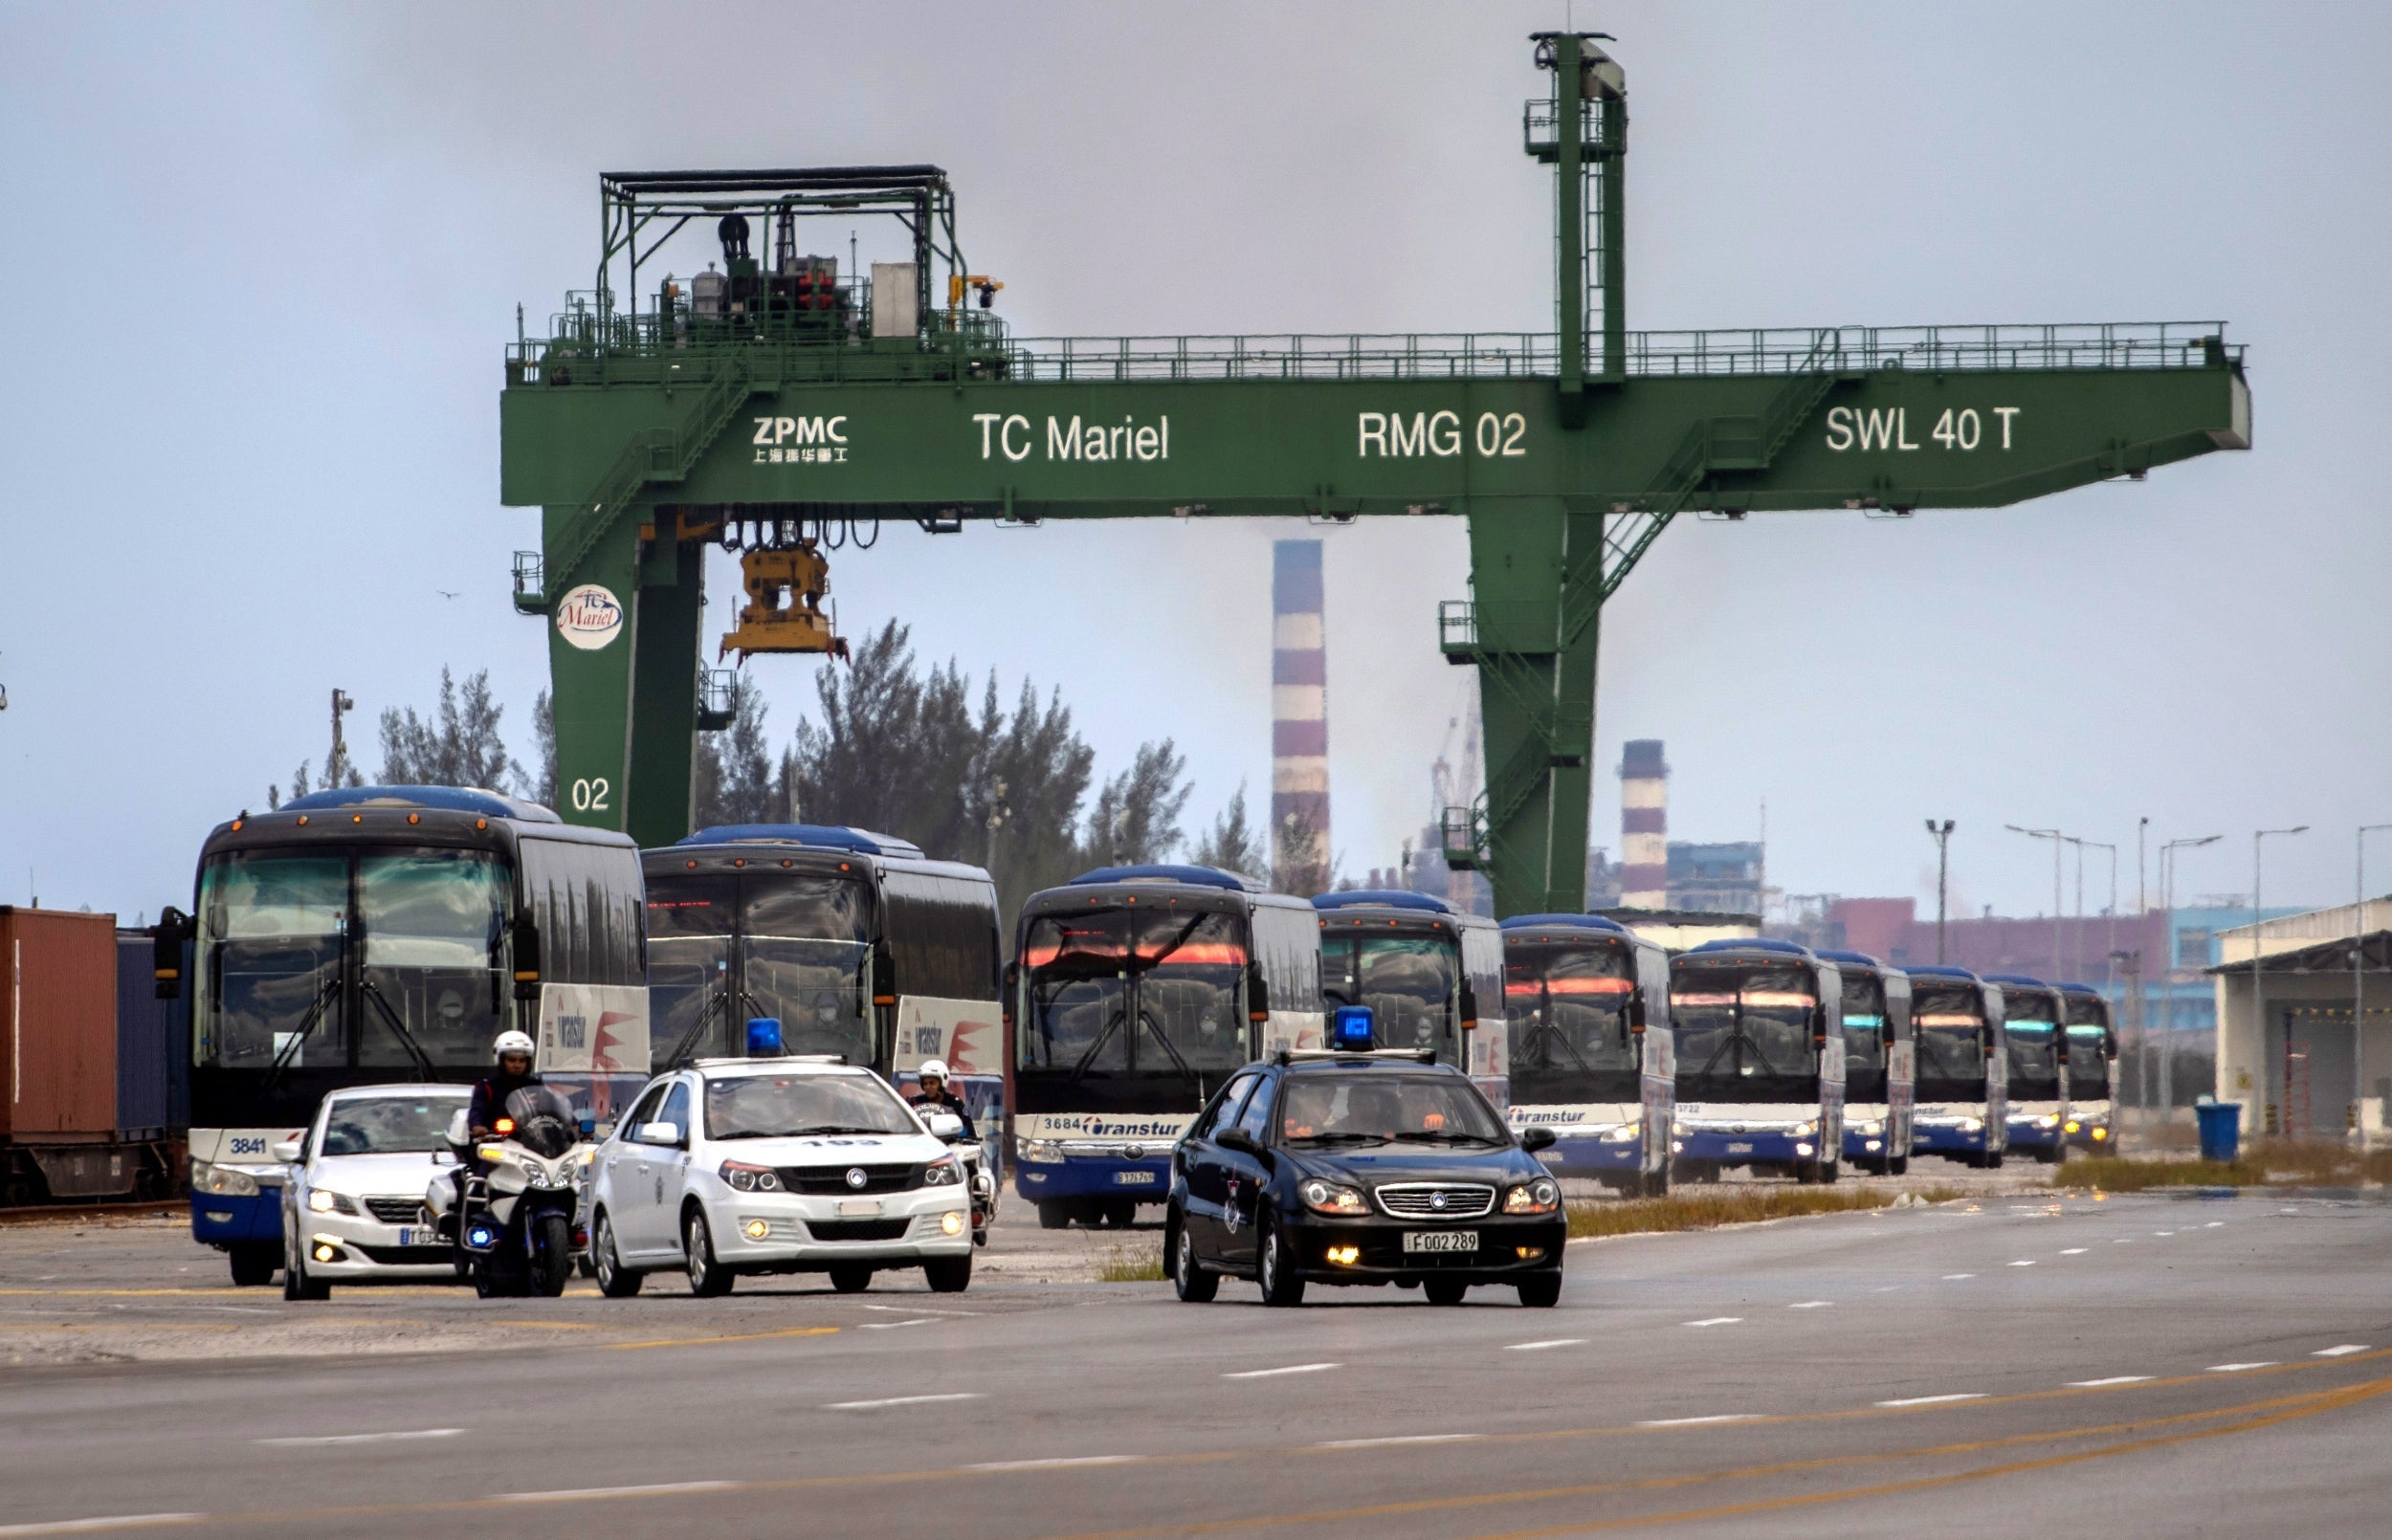 Buses escorted by police transport carry holidaymakers to an airport near Havana